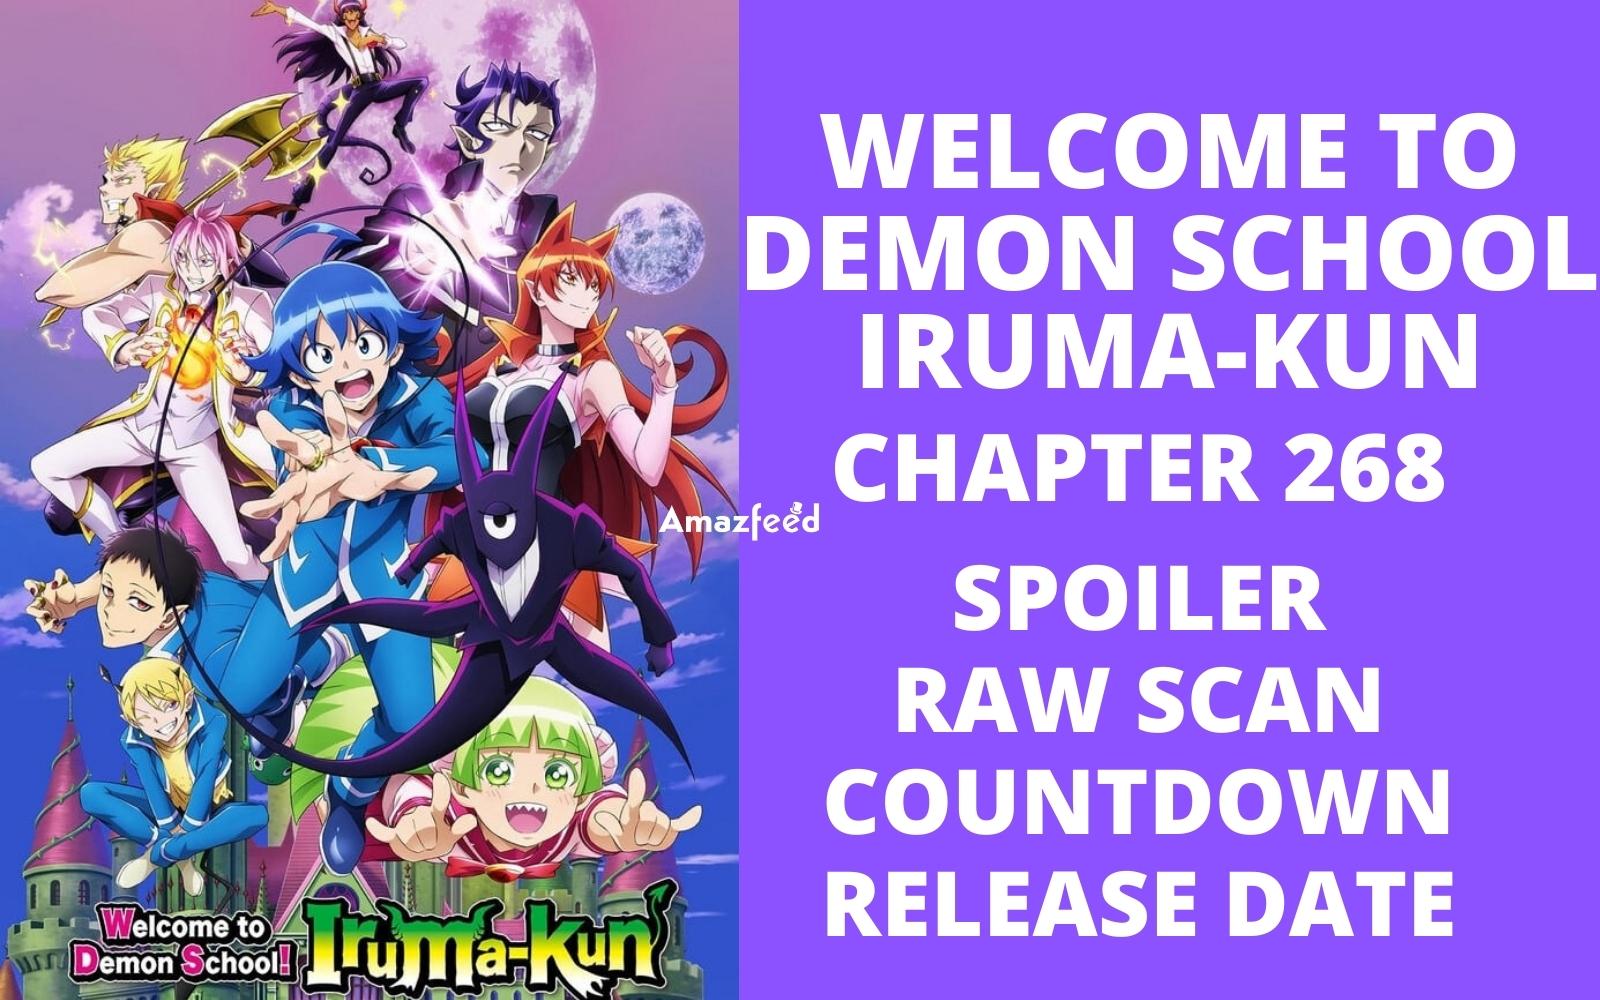 Welcome To Demon School Iruma-Kun Chapter 268 Spoiler, Release Date - Everything we know so far